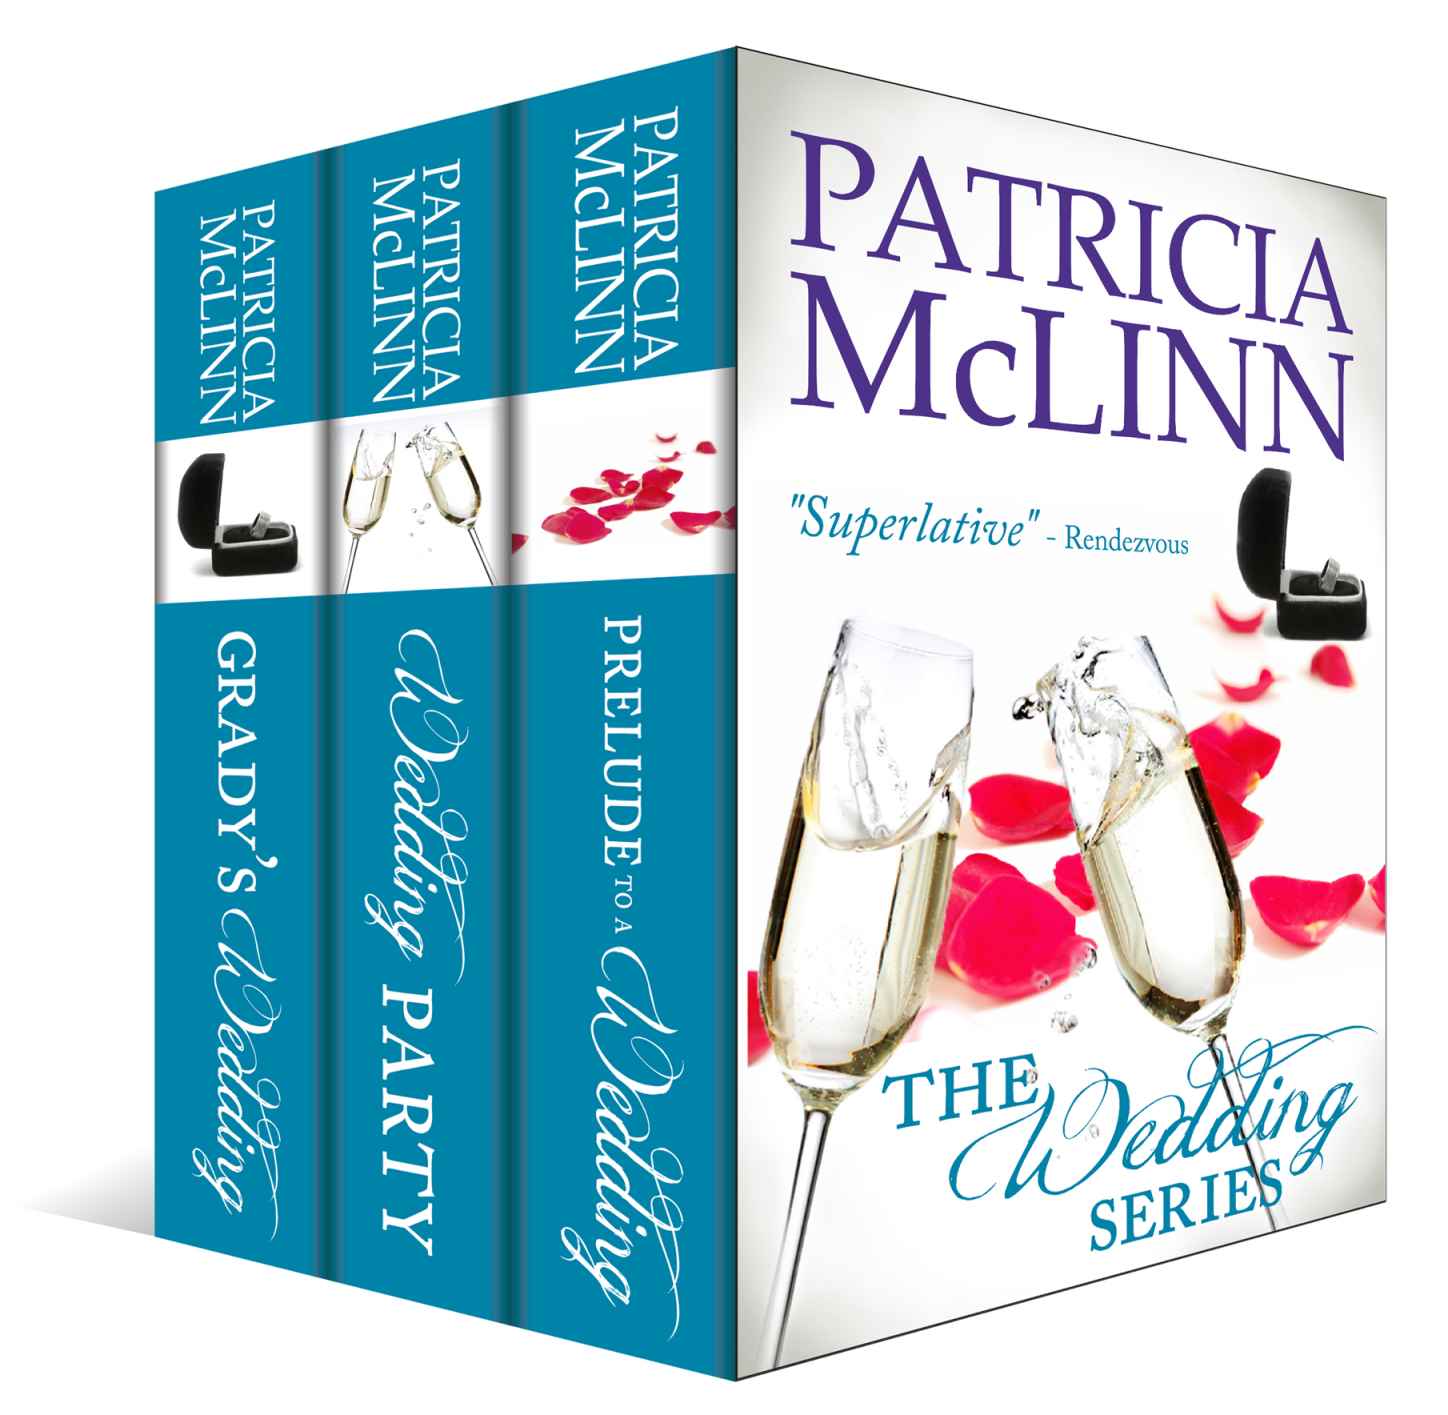 Wedding Series Boxed Set (3 Books in 1) (The Wedding Series) by Patricia McLinn